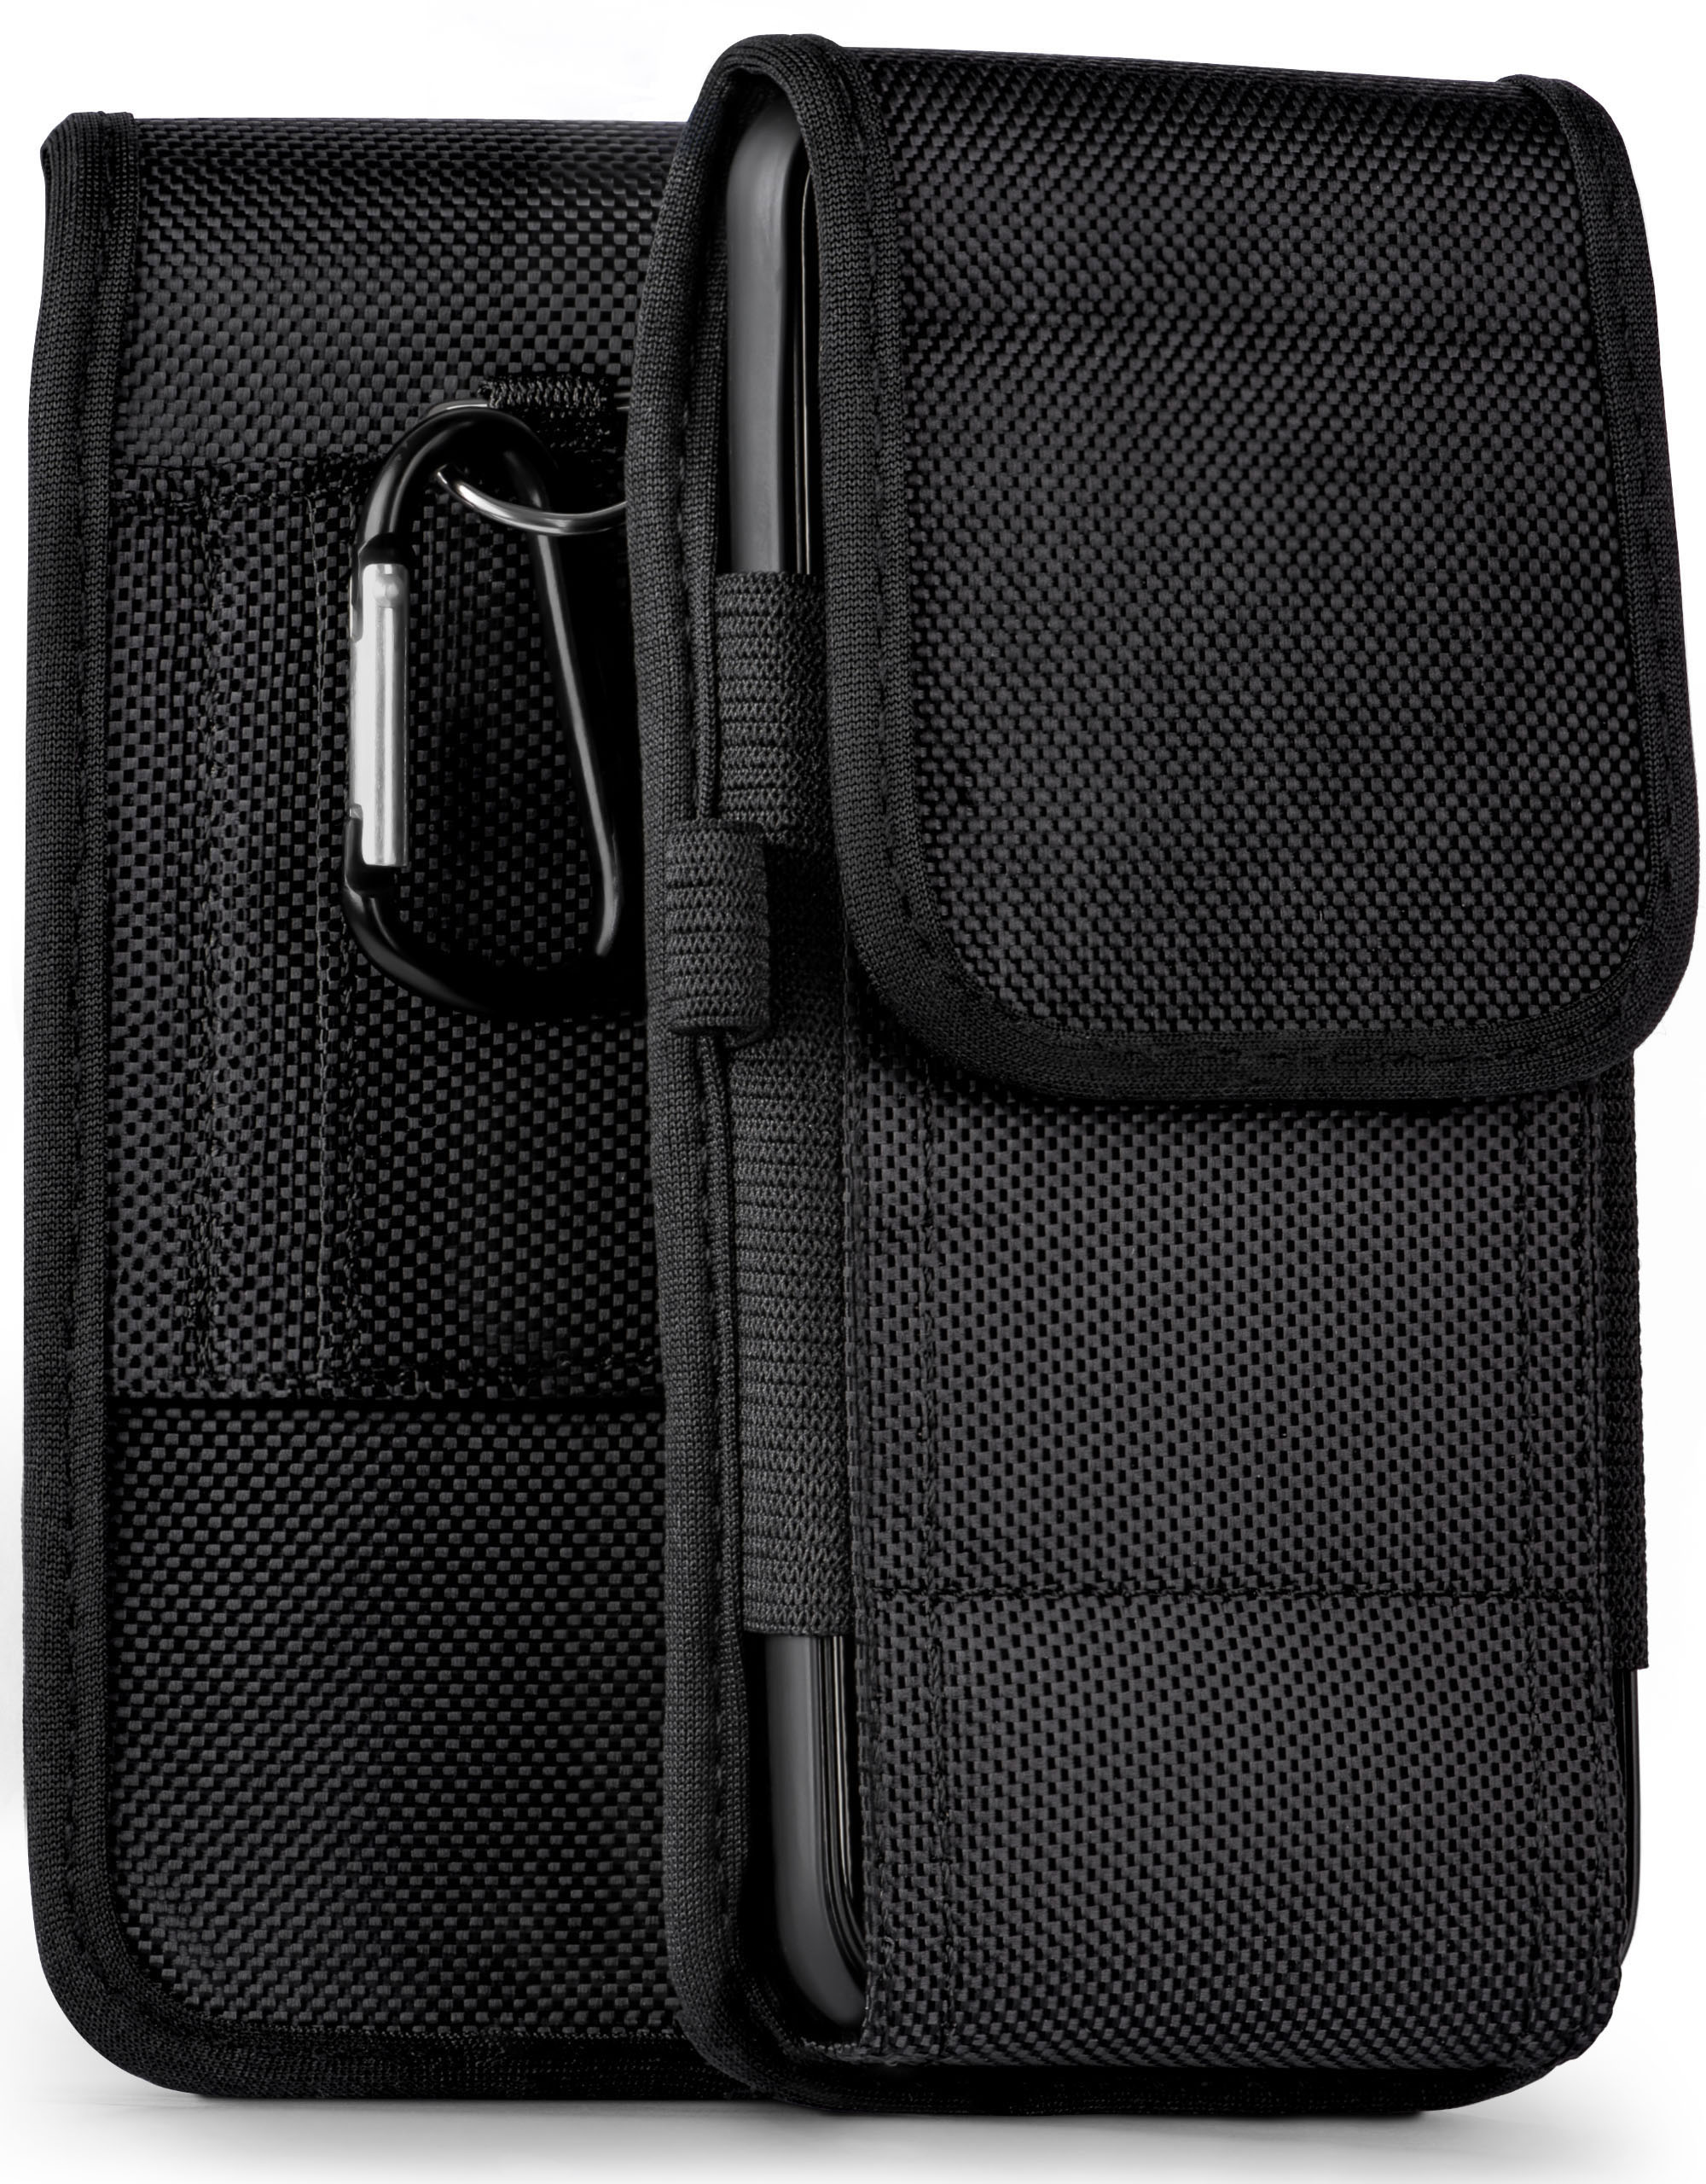 MOEX Agility Case, Holster, Trail Xperia Sony, Z2